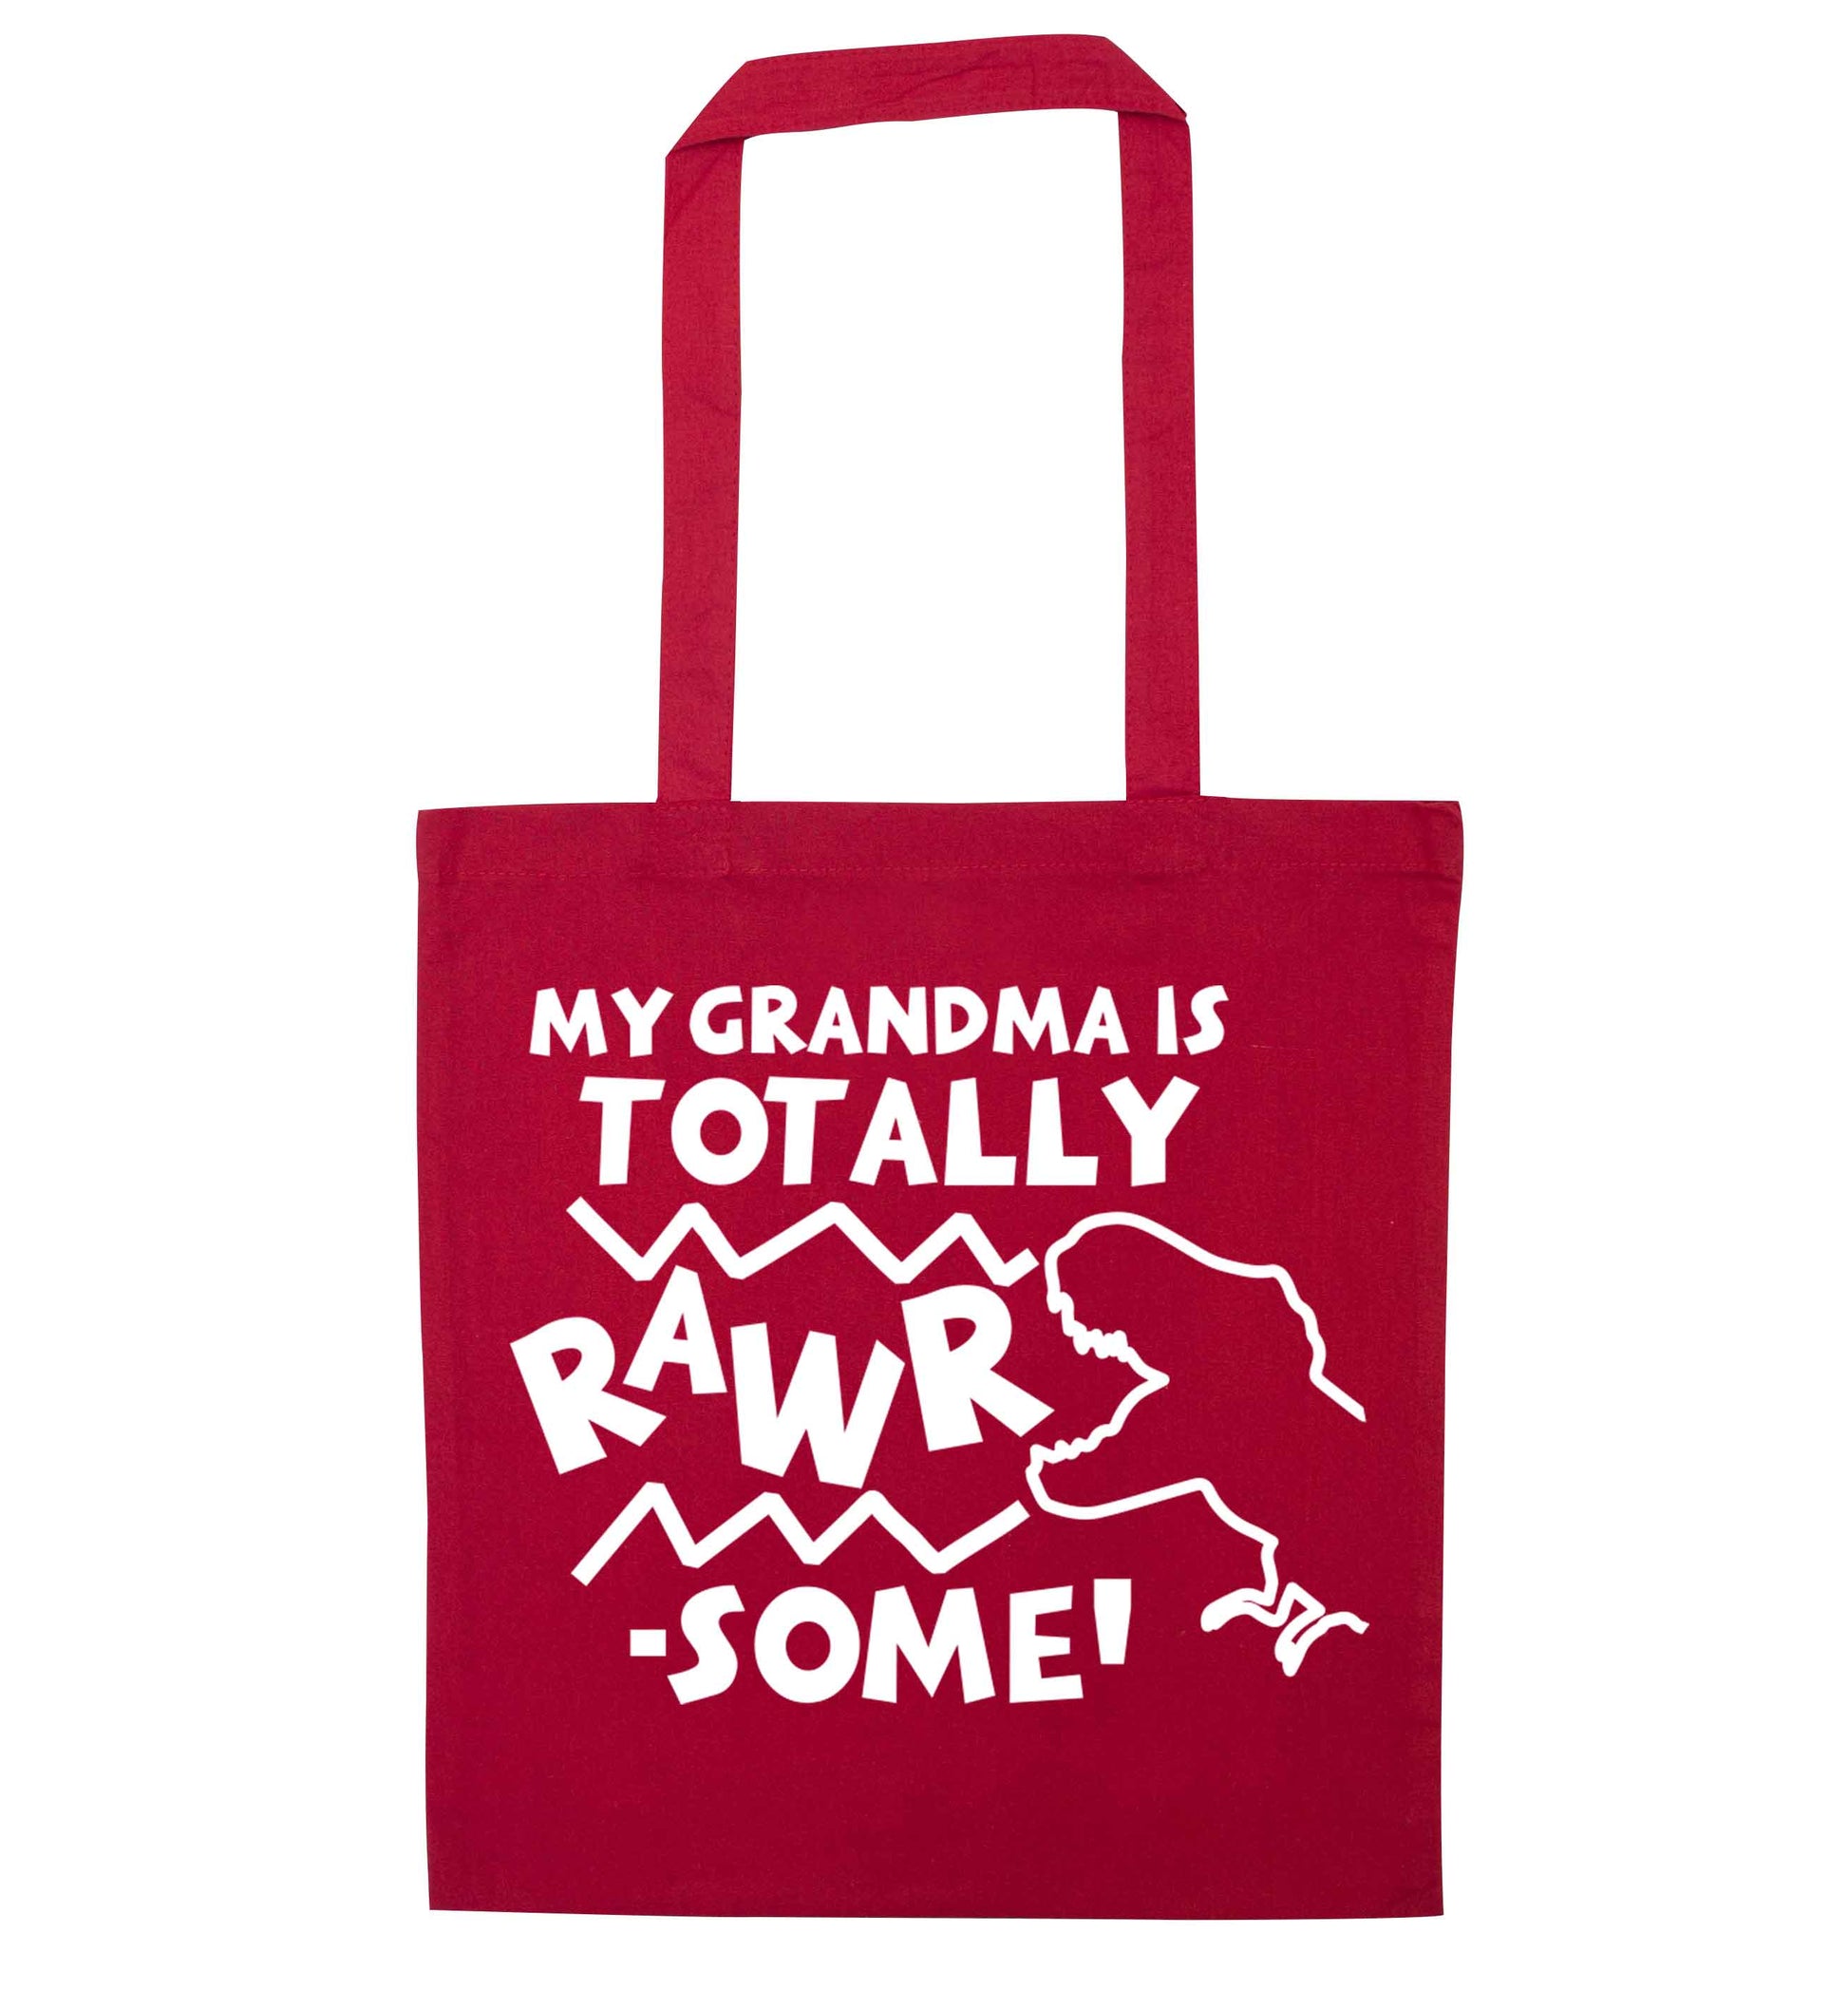 My grandma is totally rawrsome red tote bag